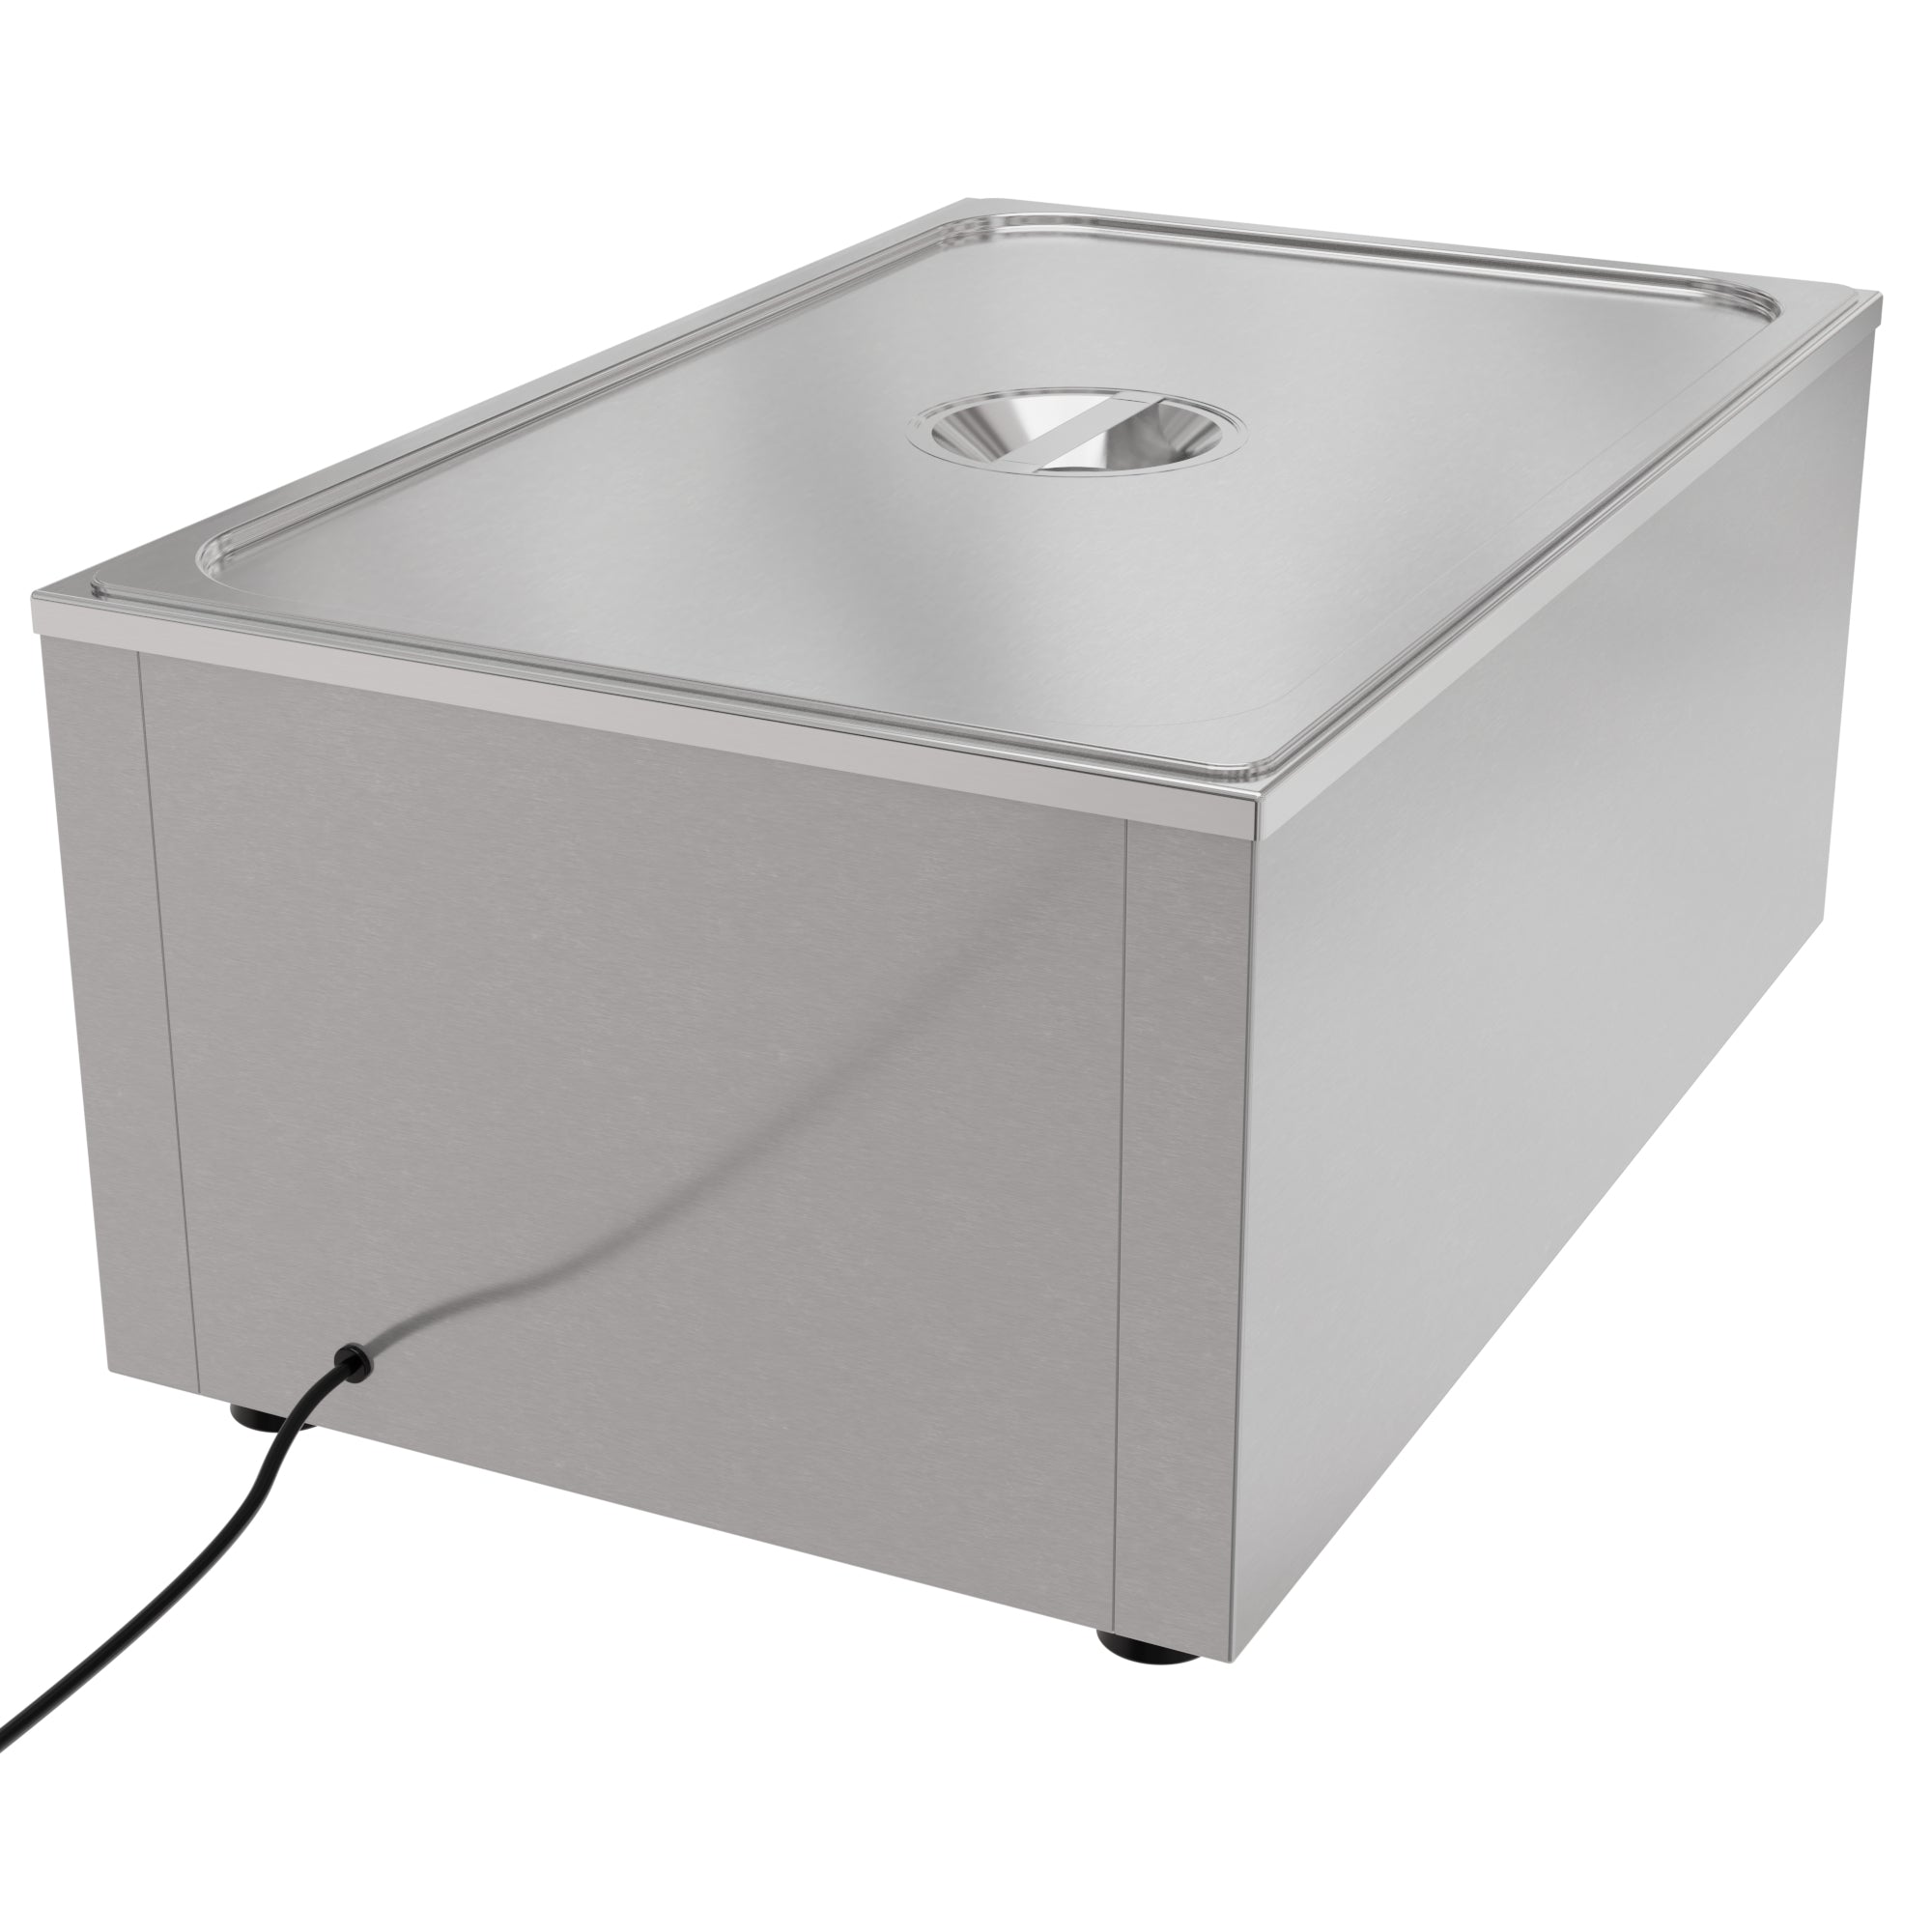 21 Qt. One-Section Electric Countertop Food Warmer With Faucet